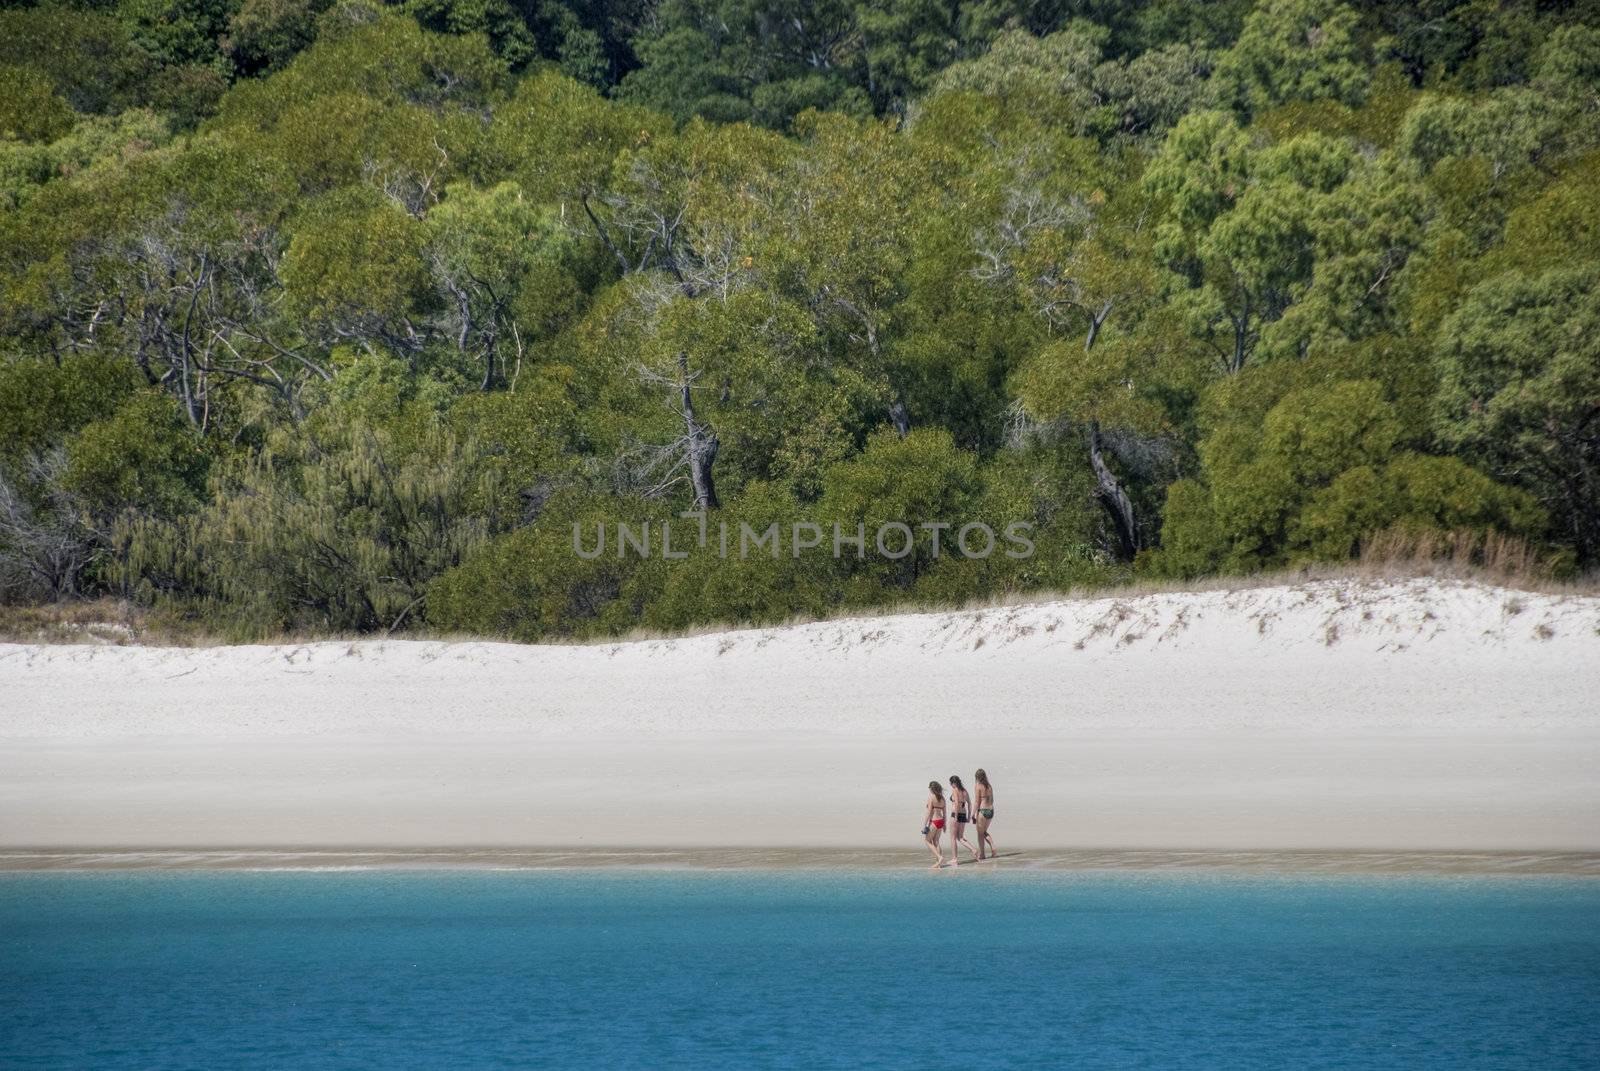 Three Girls wlking in Whitehaven Beach in the Whitsunday Islands